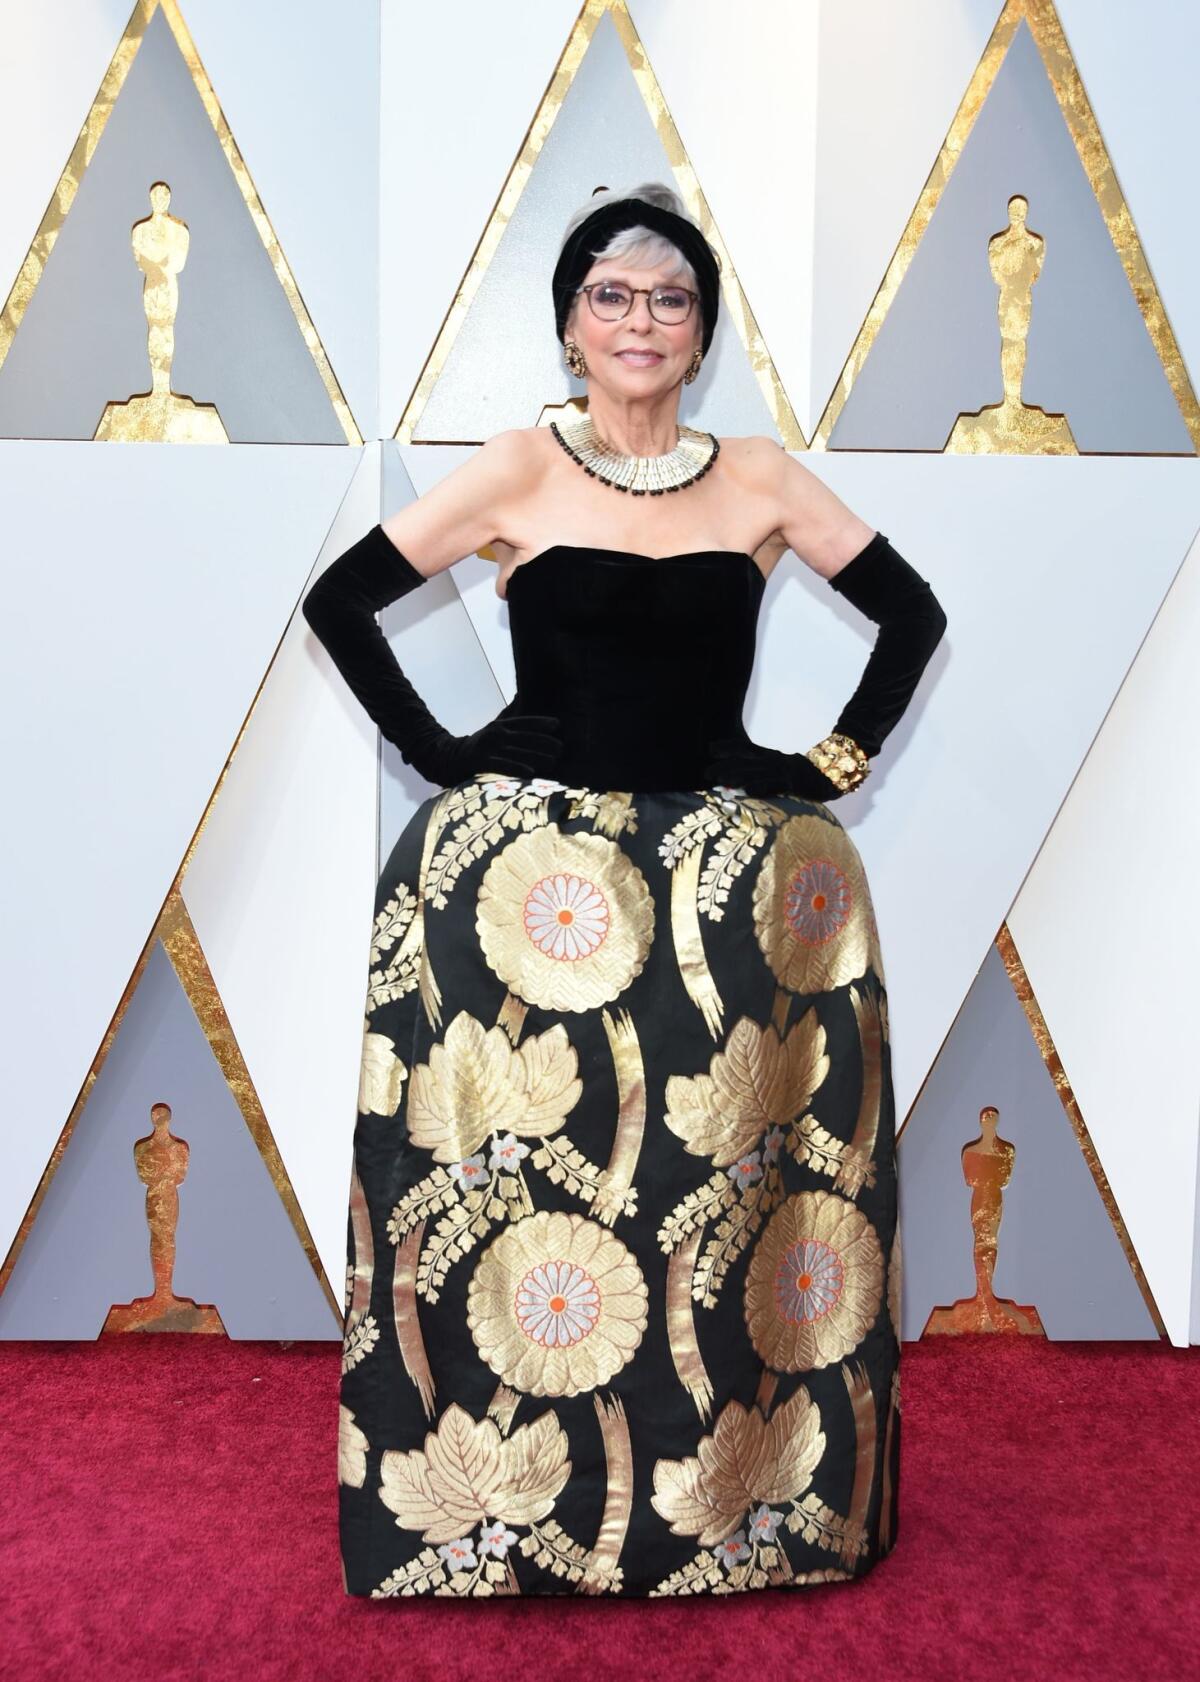 Actress Rita Moreno arrives for the 90th Academy Awards on Sunday.